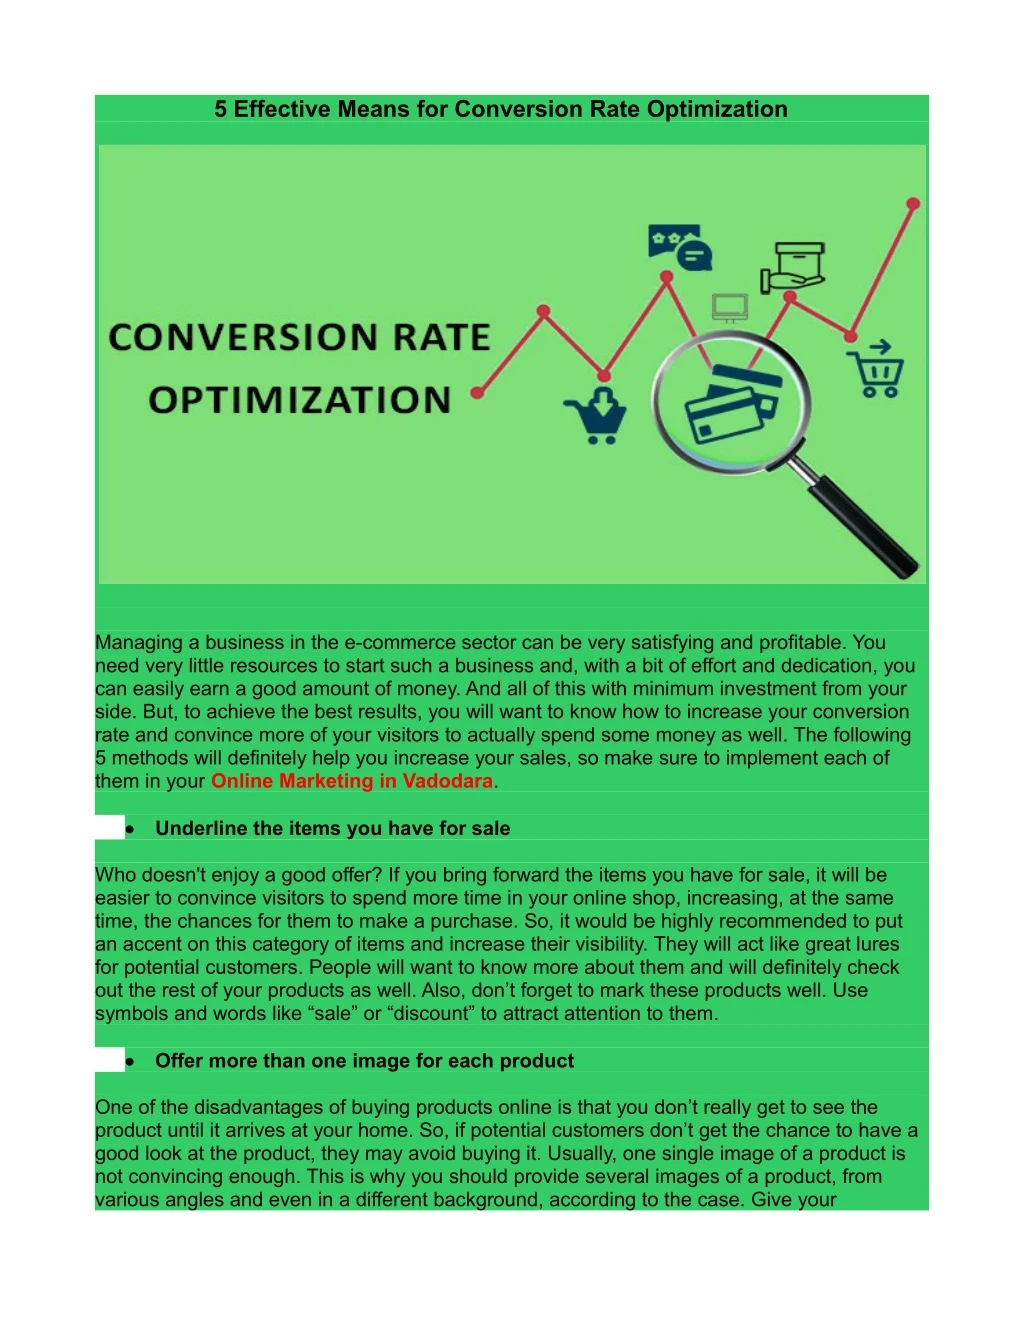 5 effective means for conversion rate optimization